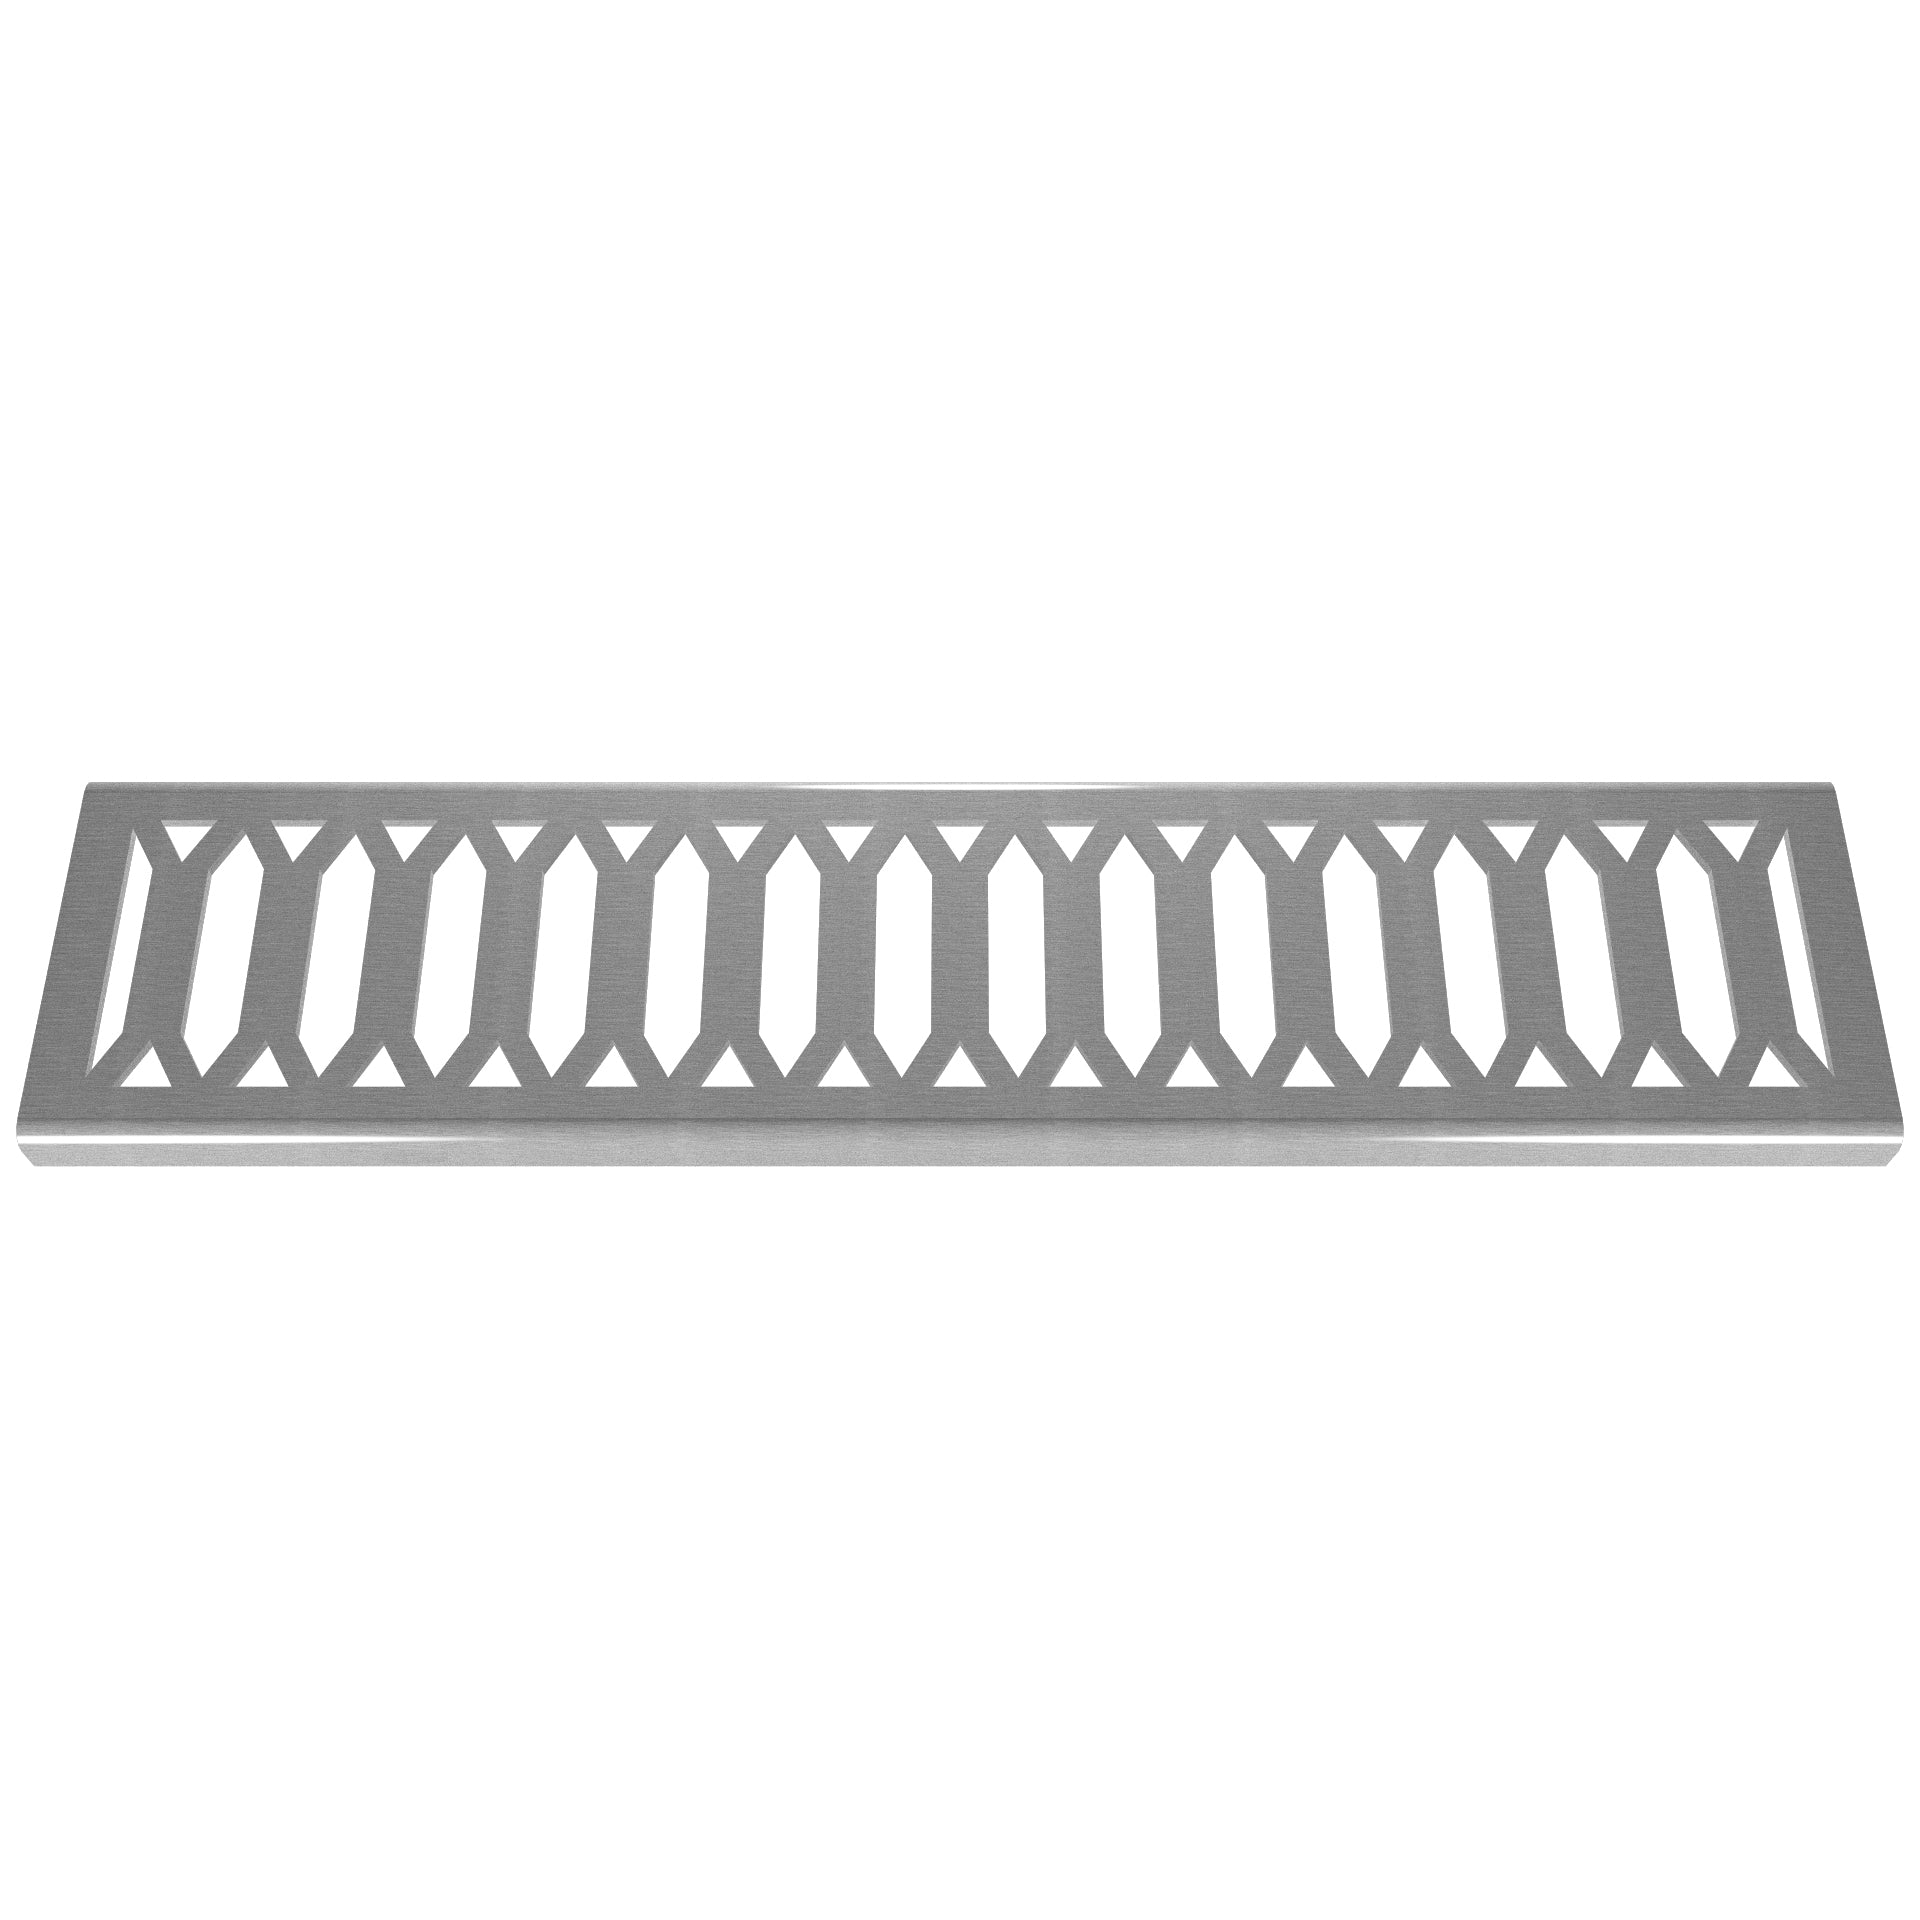 Hexagon 304 Stainless Steel Channel Drain Grate 75 x 913mm (3 Inch)